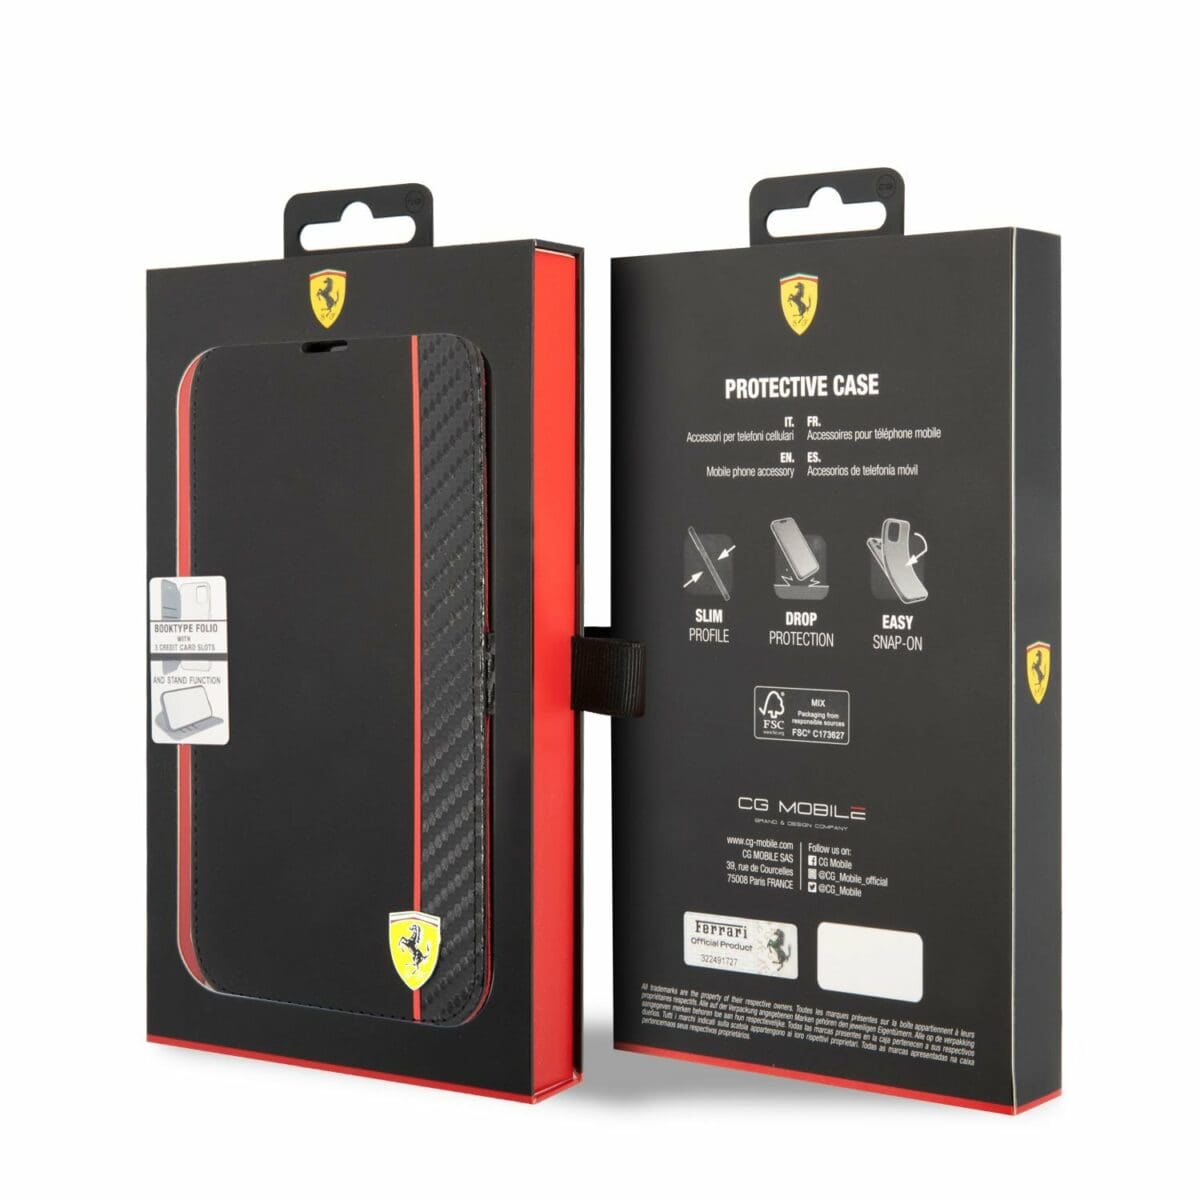 Ferrari Smooth and Carbon Effect Book Kryt iPhone 14 Pro Max Black